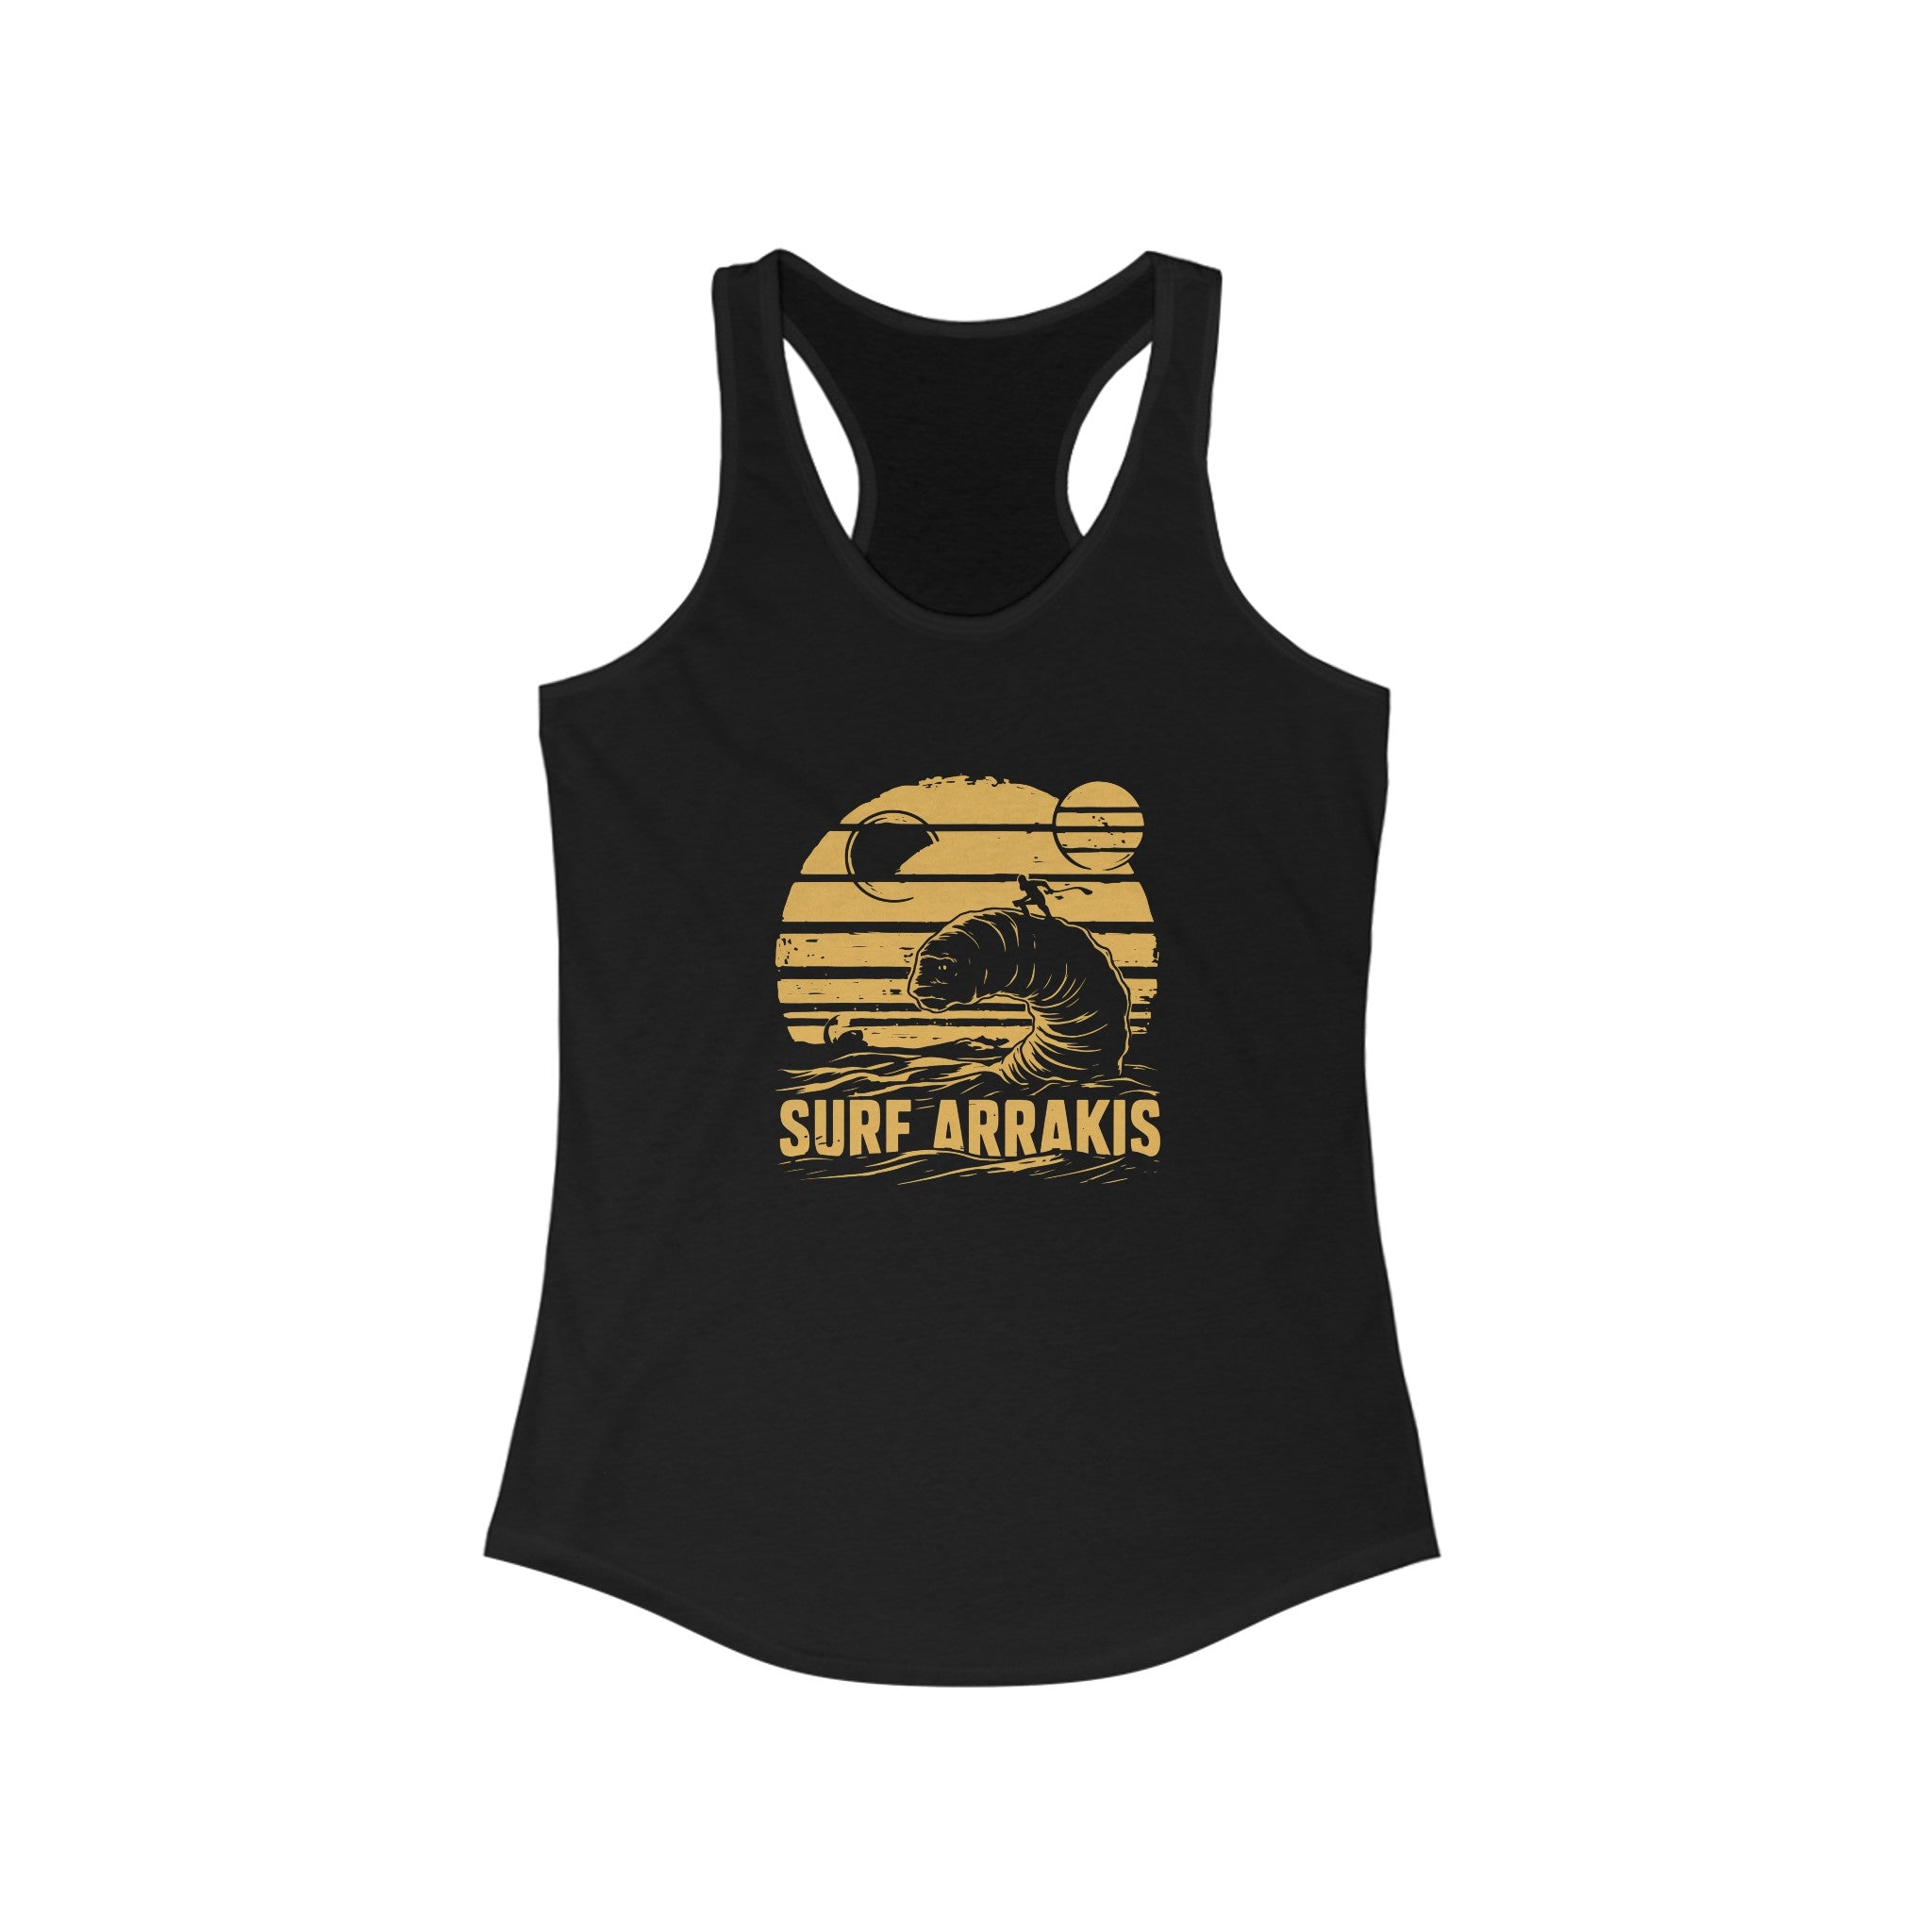 Surf Arrakis - Women's Racerback Tank with "Surf Arrakis" text and a graphic of a sand dune and large creature emerging from it, perfect for an active lifestyle.